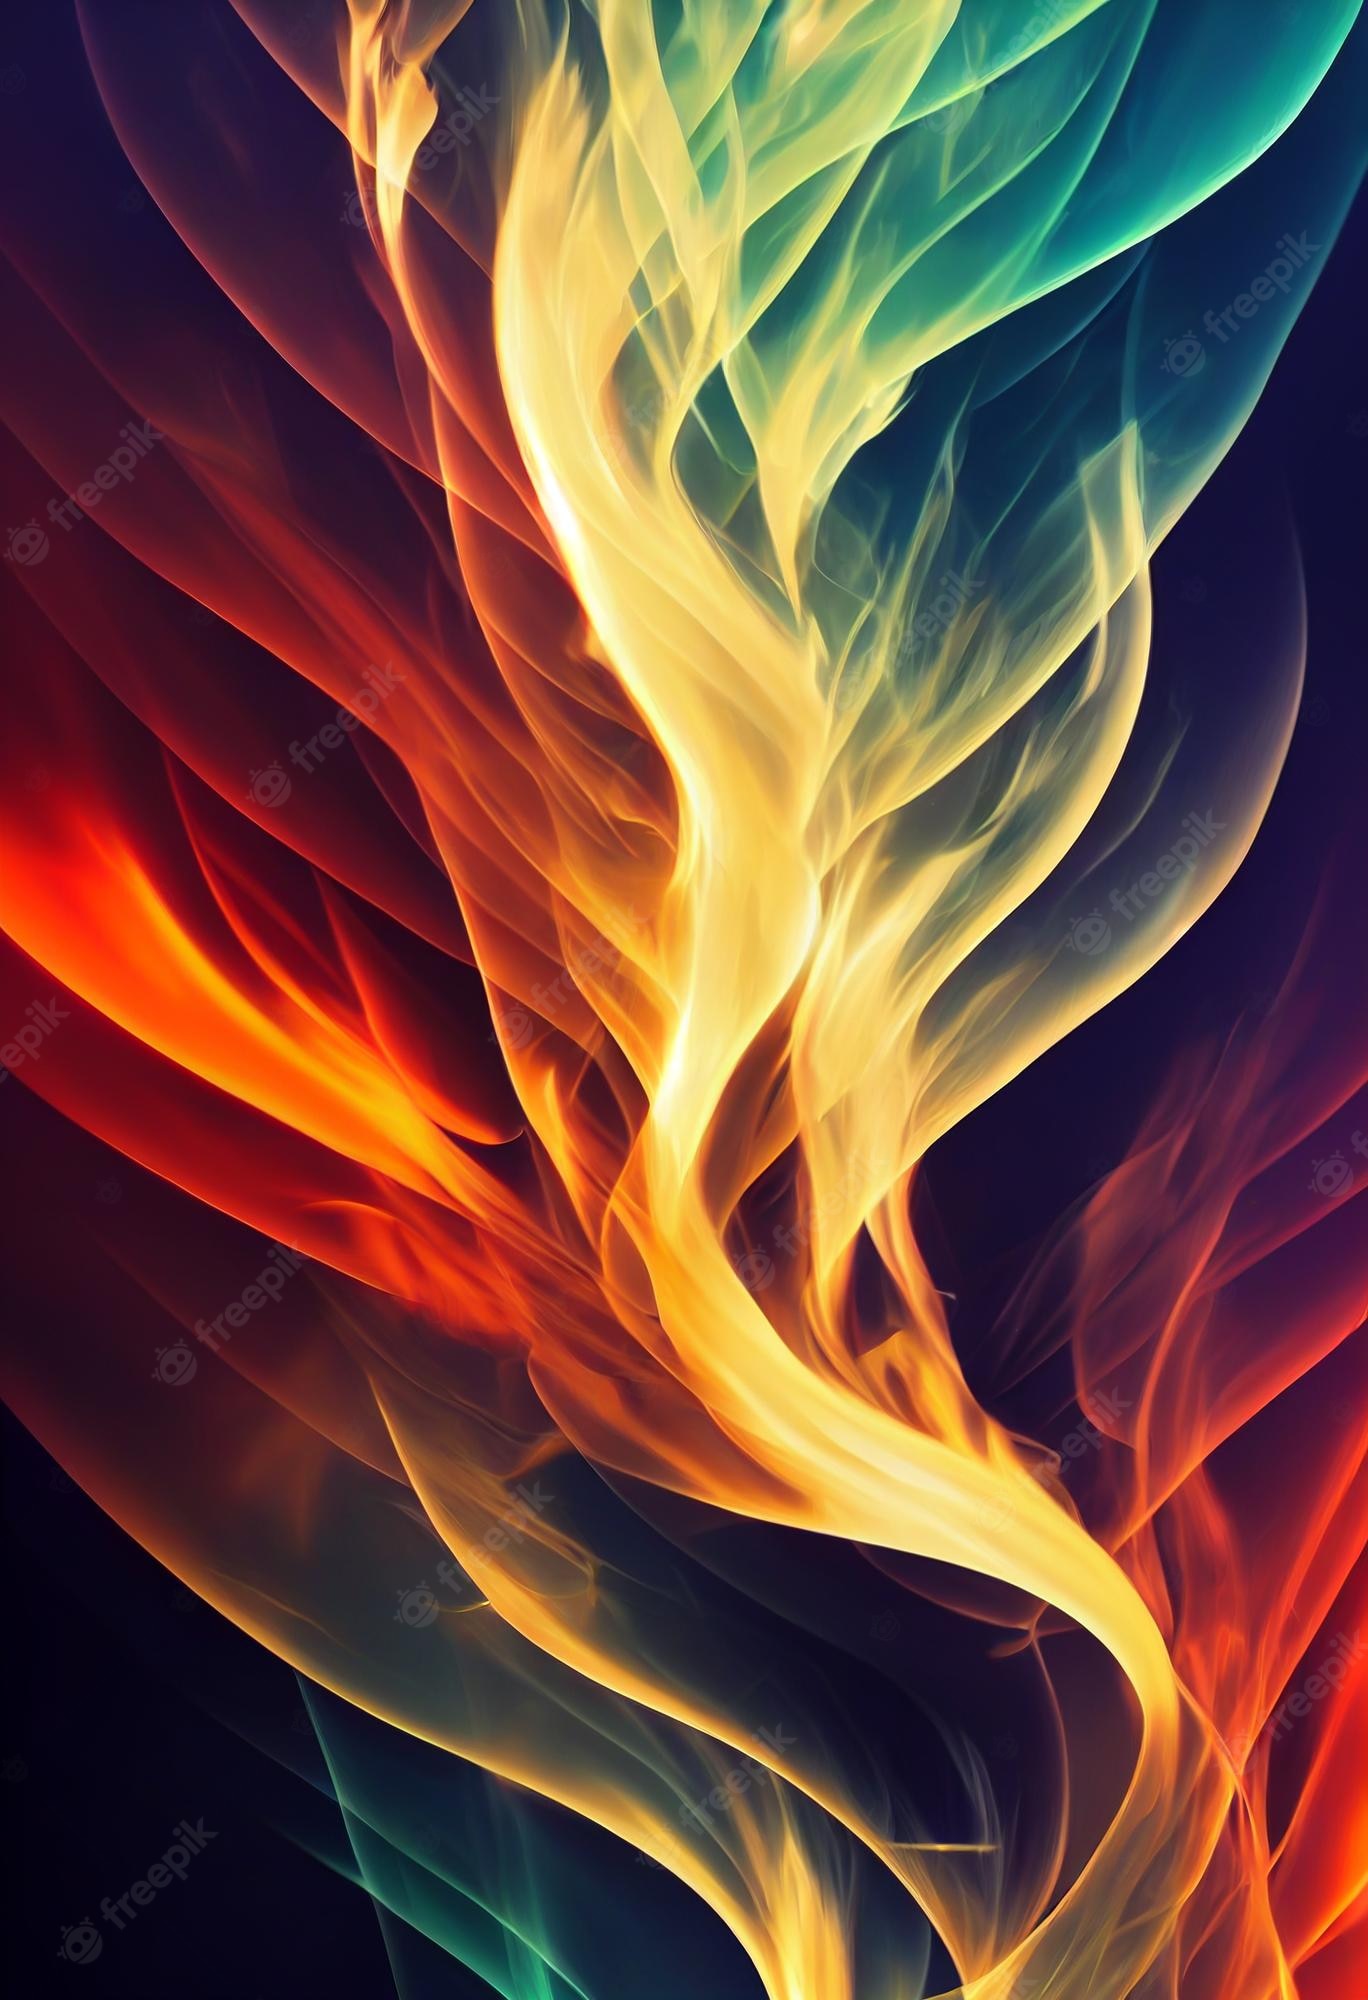 Cool 3D Fire Wallpapers